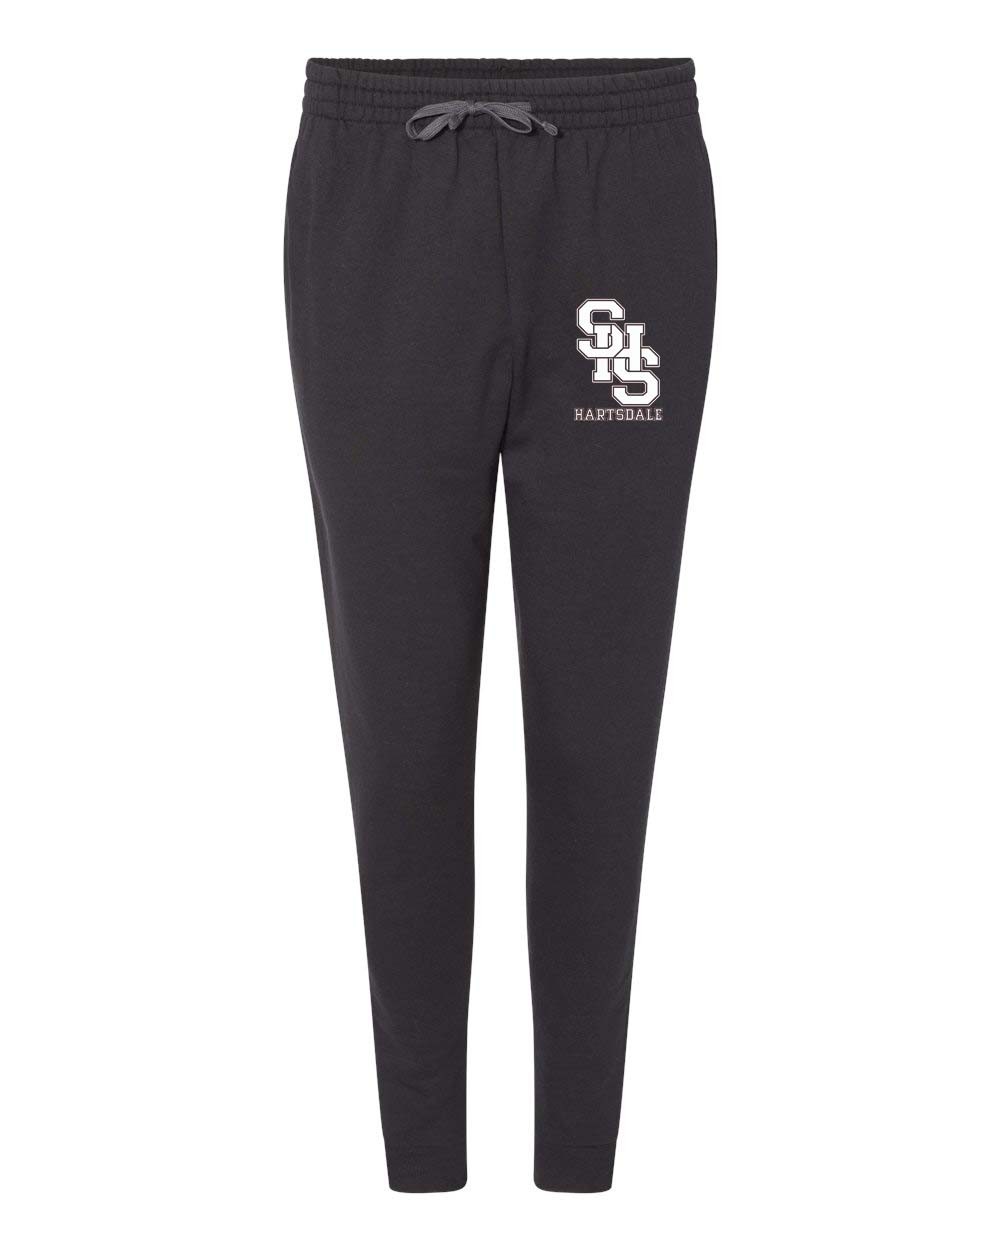 SHS Staff Joggers w/ White Logo - Please Allow 2-3 Weeks for Delivery